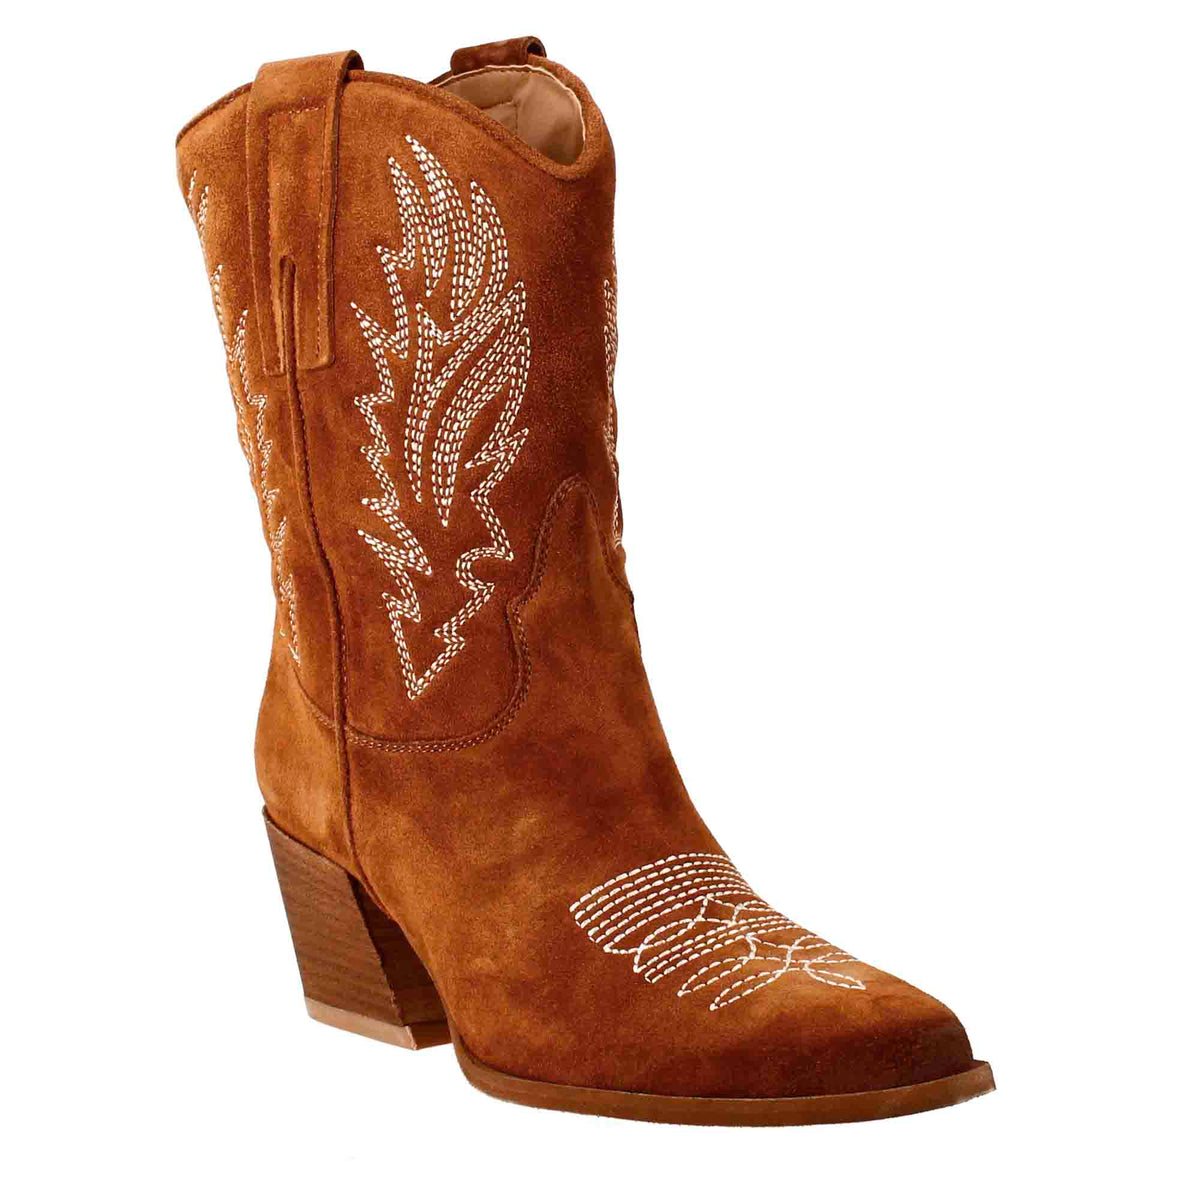 Low women's Texan boots in burnt brown suede with embroidery.